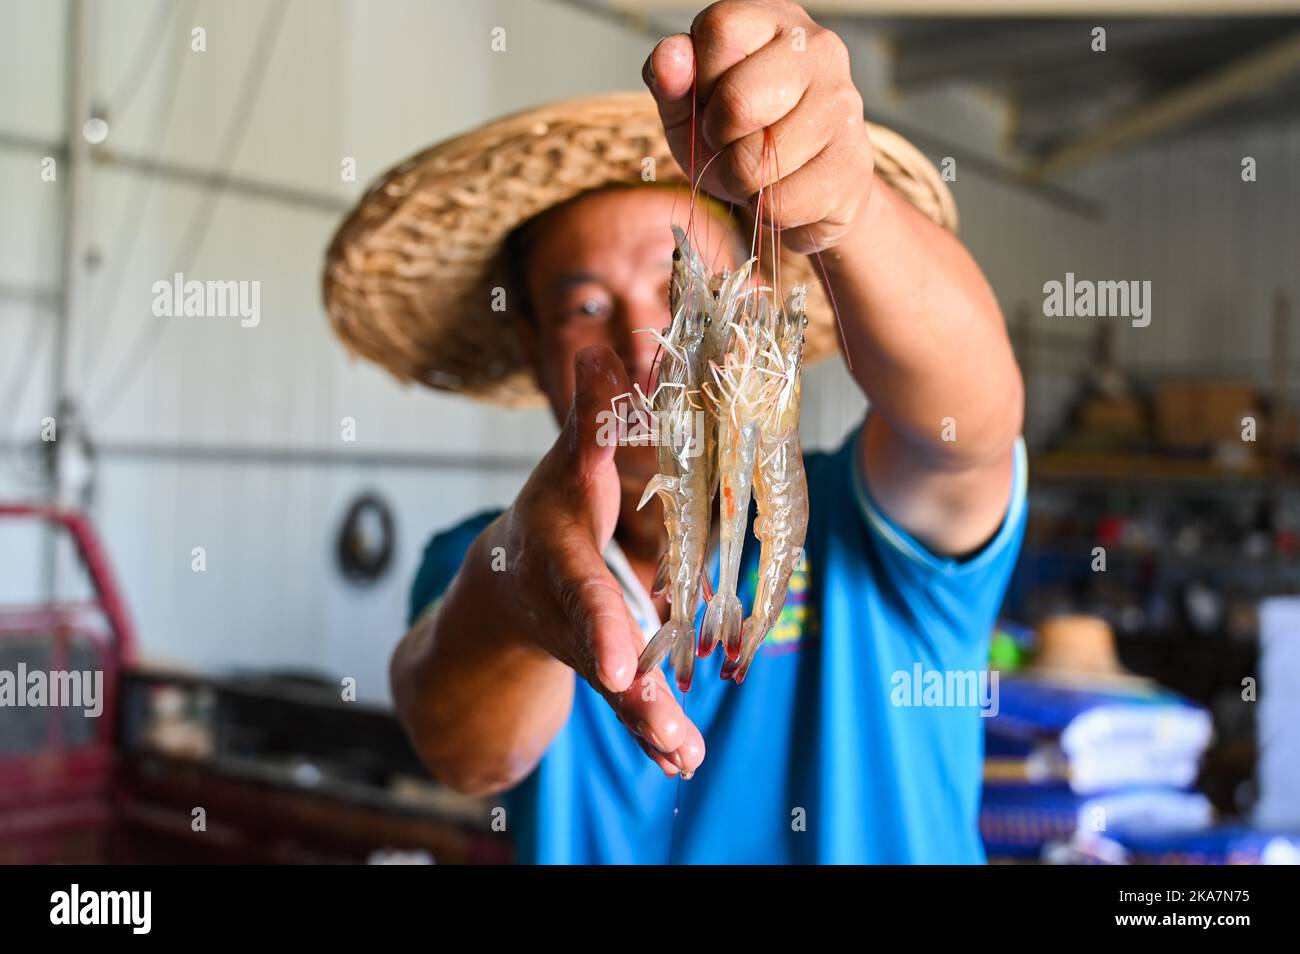 Hohhot. 25th Aug, 2022. A farmer shows shrimps fed in a pond in north China's Inner Mongolia Autonomous Region, Aug. 25, 2022. TO GO WITH 'Across China: Shrimp aquaculture proves lucrative for Inner Mongolia farmers' Credit: Liu Lei/Xinhua/Alamy Live News Stock Photo